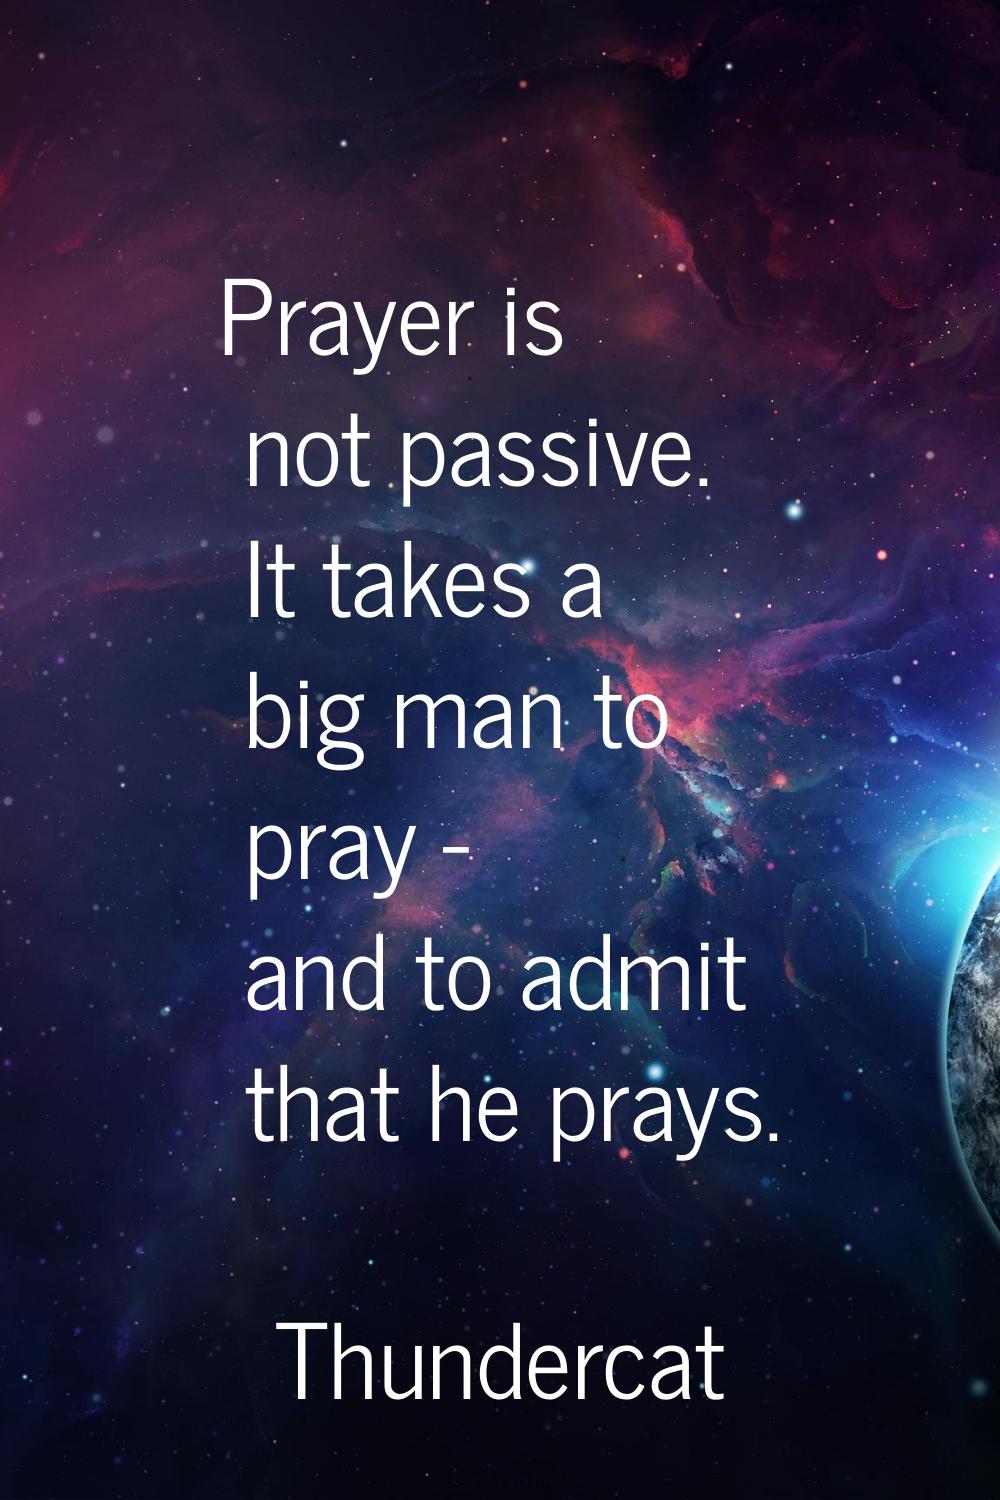 Prayer is not passive. It takes a big man to pray - and to admit that he prays.